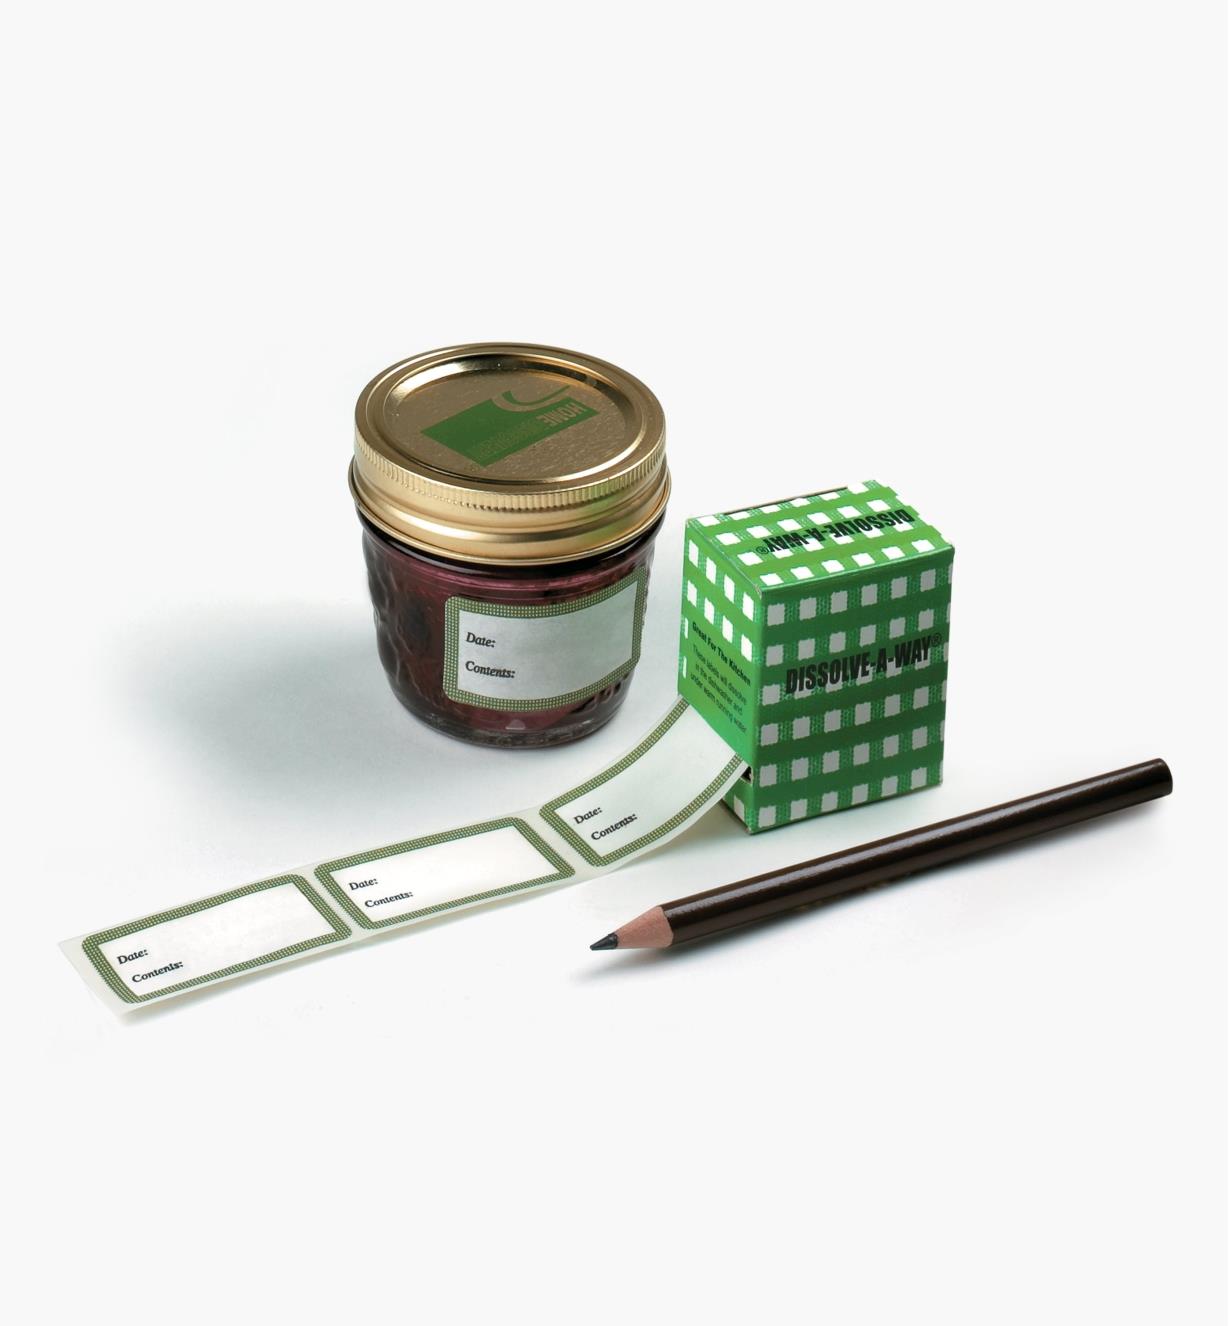 Box of dissolvable labels next to a jam jar and a pencil